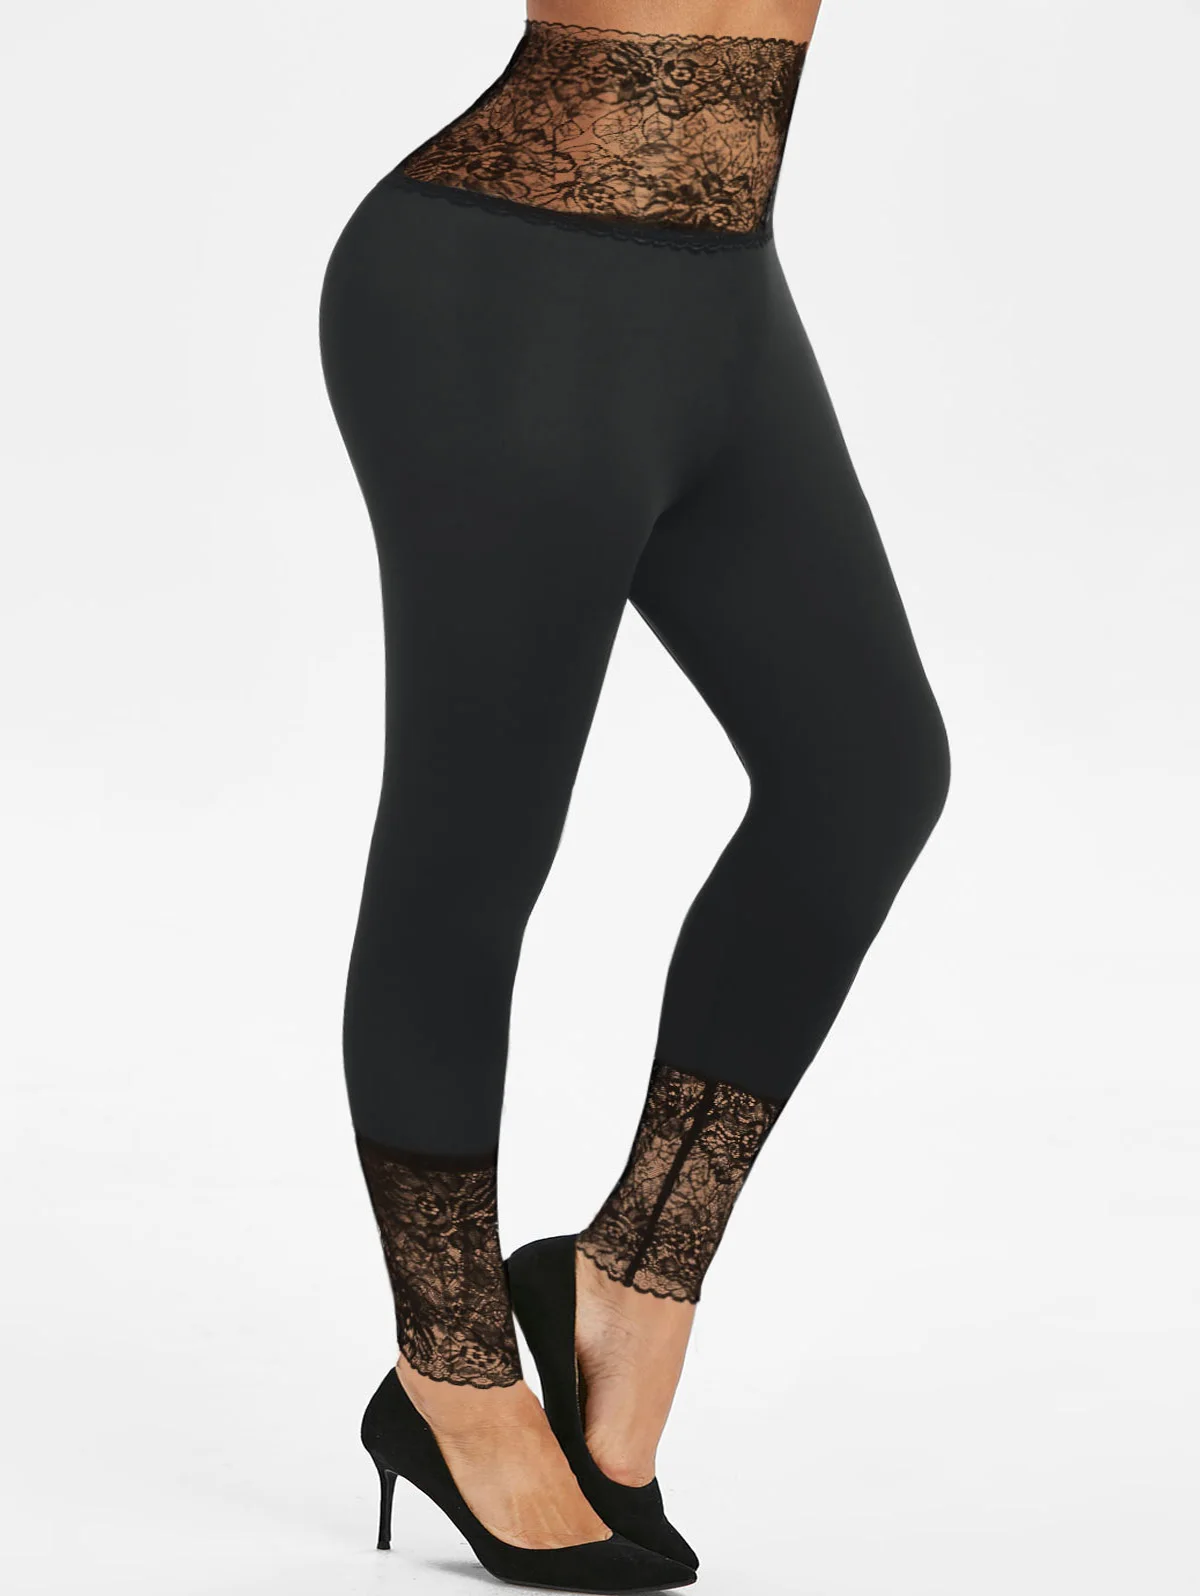 

L-5XL Plus Size Leggings Solid Black Color See Thru Lace Panel Scalloped High Waisted Skinny Long Pants